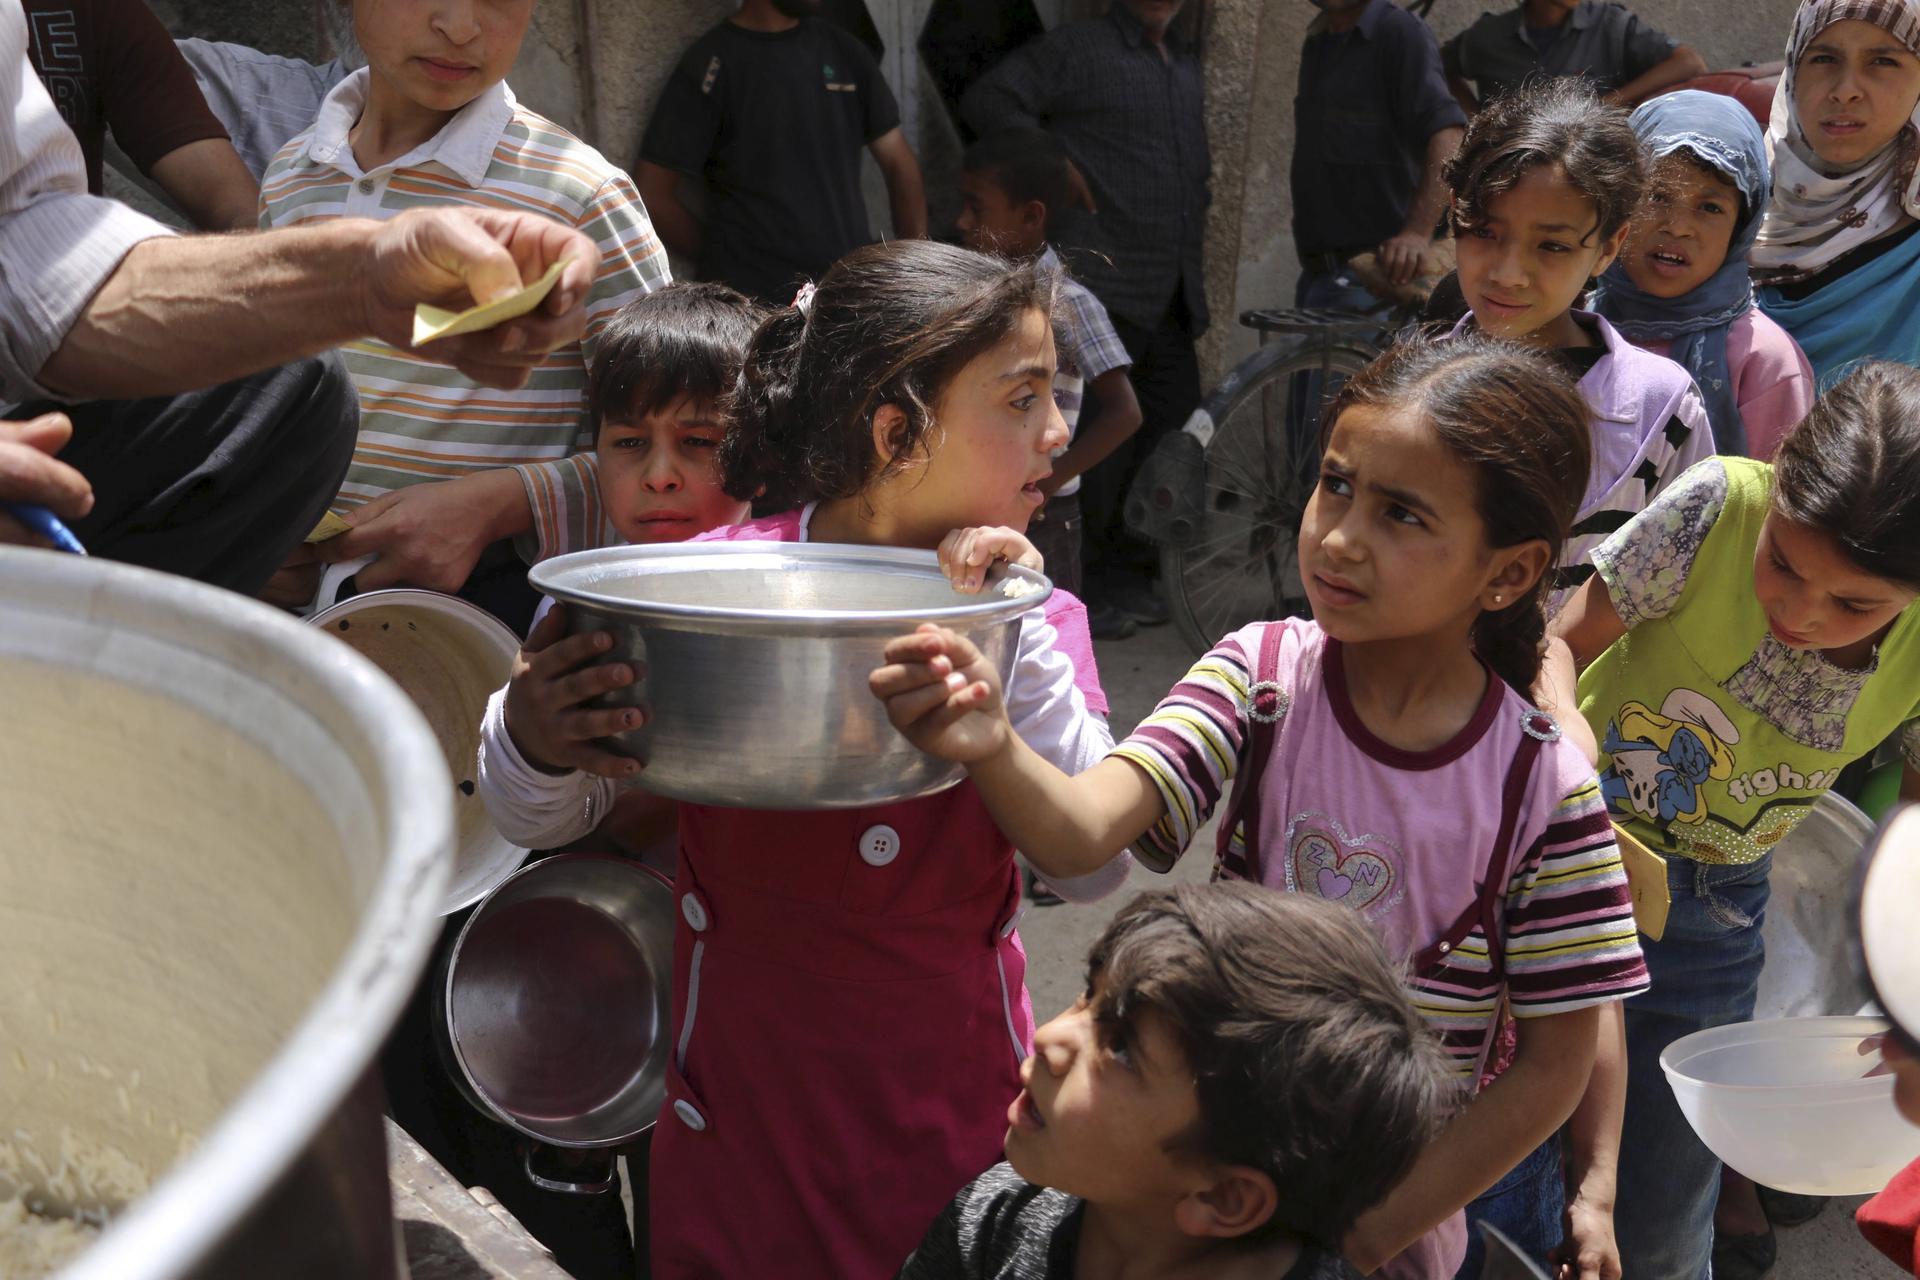 Children carry containers as they queue to receive free meals from a soup kitchen in the besieged town of Deir al-Asafir in the Eastern Ghouta of Damascus May 19, 2015.